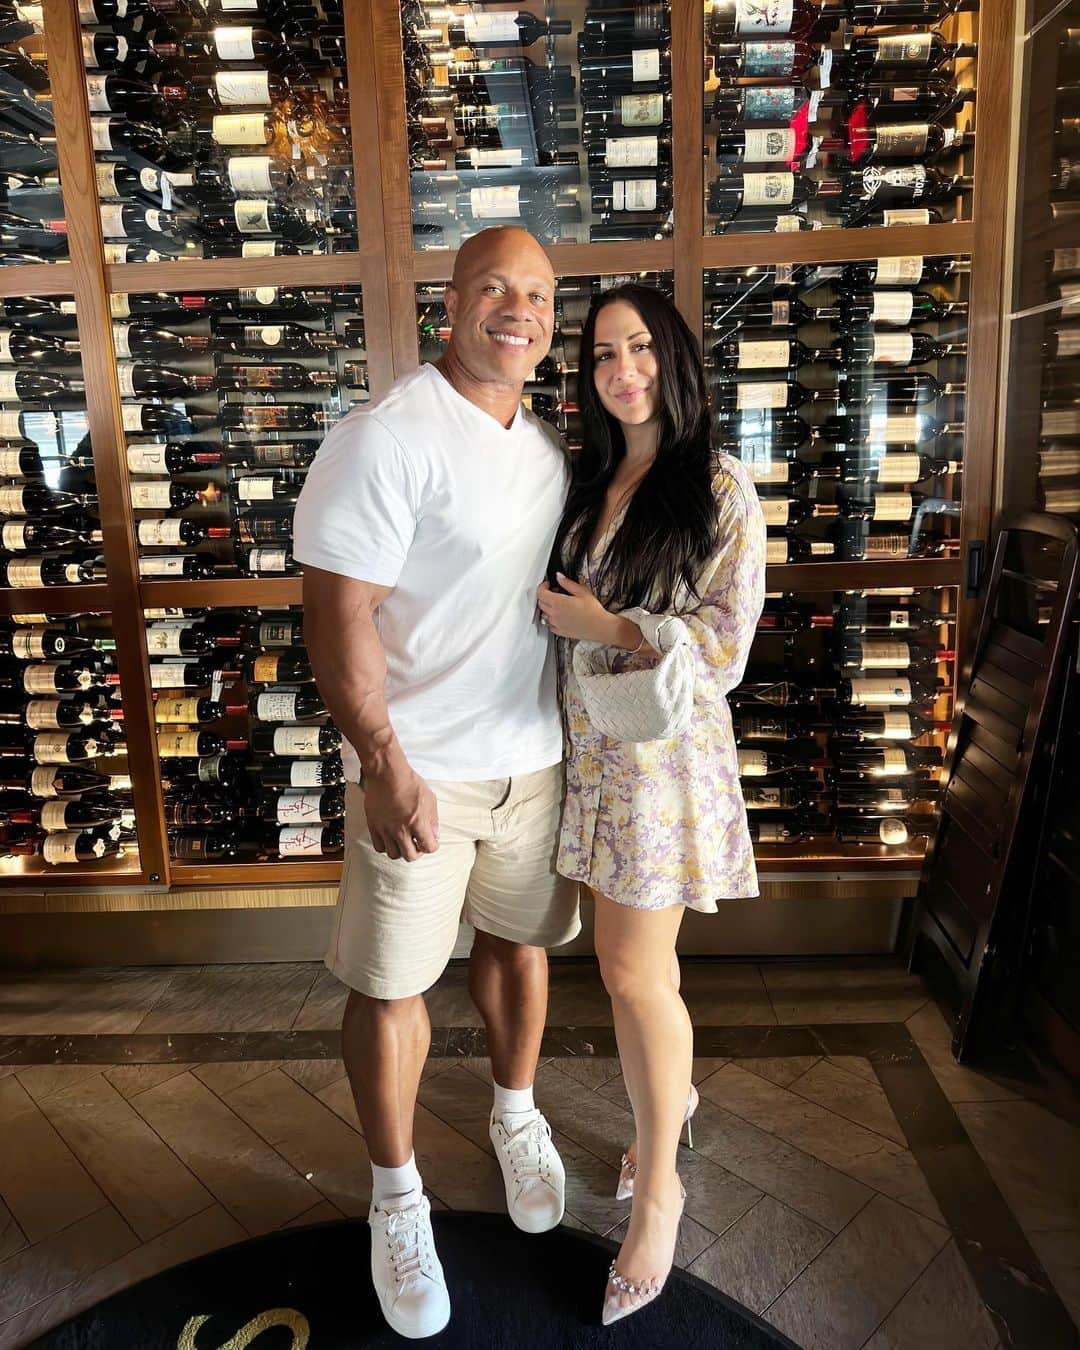 Phil Heathのインスタグラム：「💗🥹🙏 A perfect ending to my Birthday weekend. @philheath planned Brunch at our favorite restaurant Mastros Ocean Club.  My incredible friend @julianna1106 went above and beyond setting up our table with gorgeous flowers, candles, a sweet card and personalized menus.  @_kponce thank you too 🤗🥹 Our friend @brucemarafon poured us our Apreol Sprits and our friend Manny @hulksmash315 surprised us with a bottle of our favorite champagne. The food is always PERFECTION @mastrosofficial   I am beyond grateful and soooooo thankful to have an amazing & loving husband and such incredible friends and family in my life! Thank you all for the incredible flowers, gifts, messages and calls. You all mean the world to me and you made my birthday truly unforgettable!   XOXO Shurie 💗🤗」